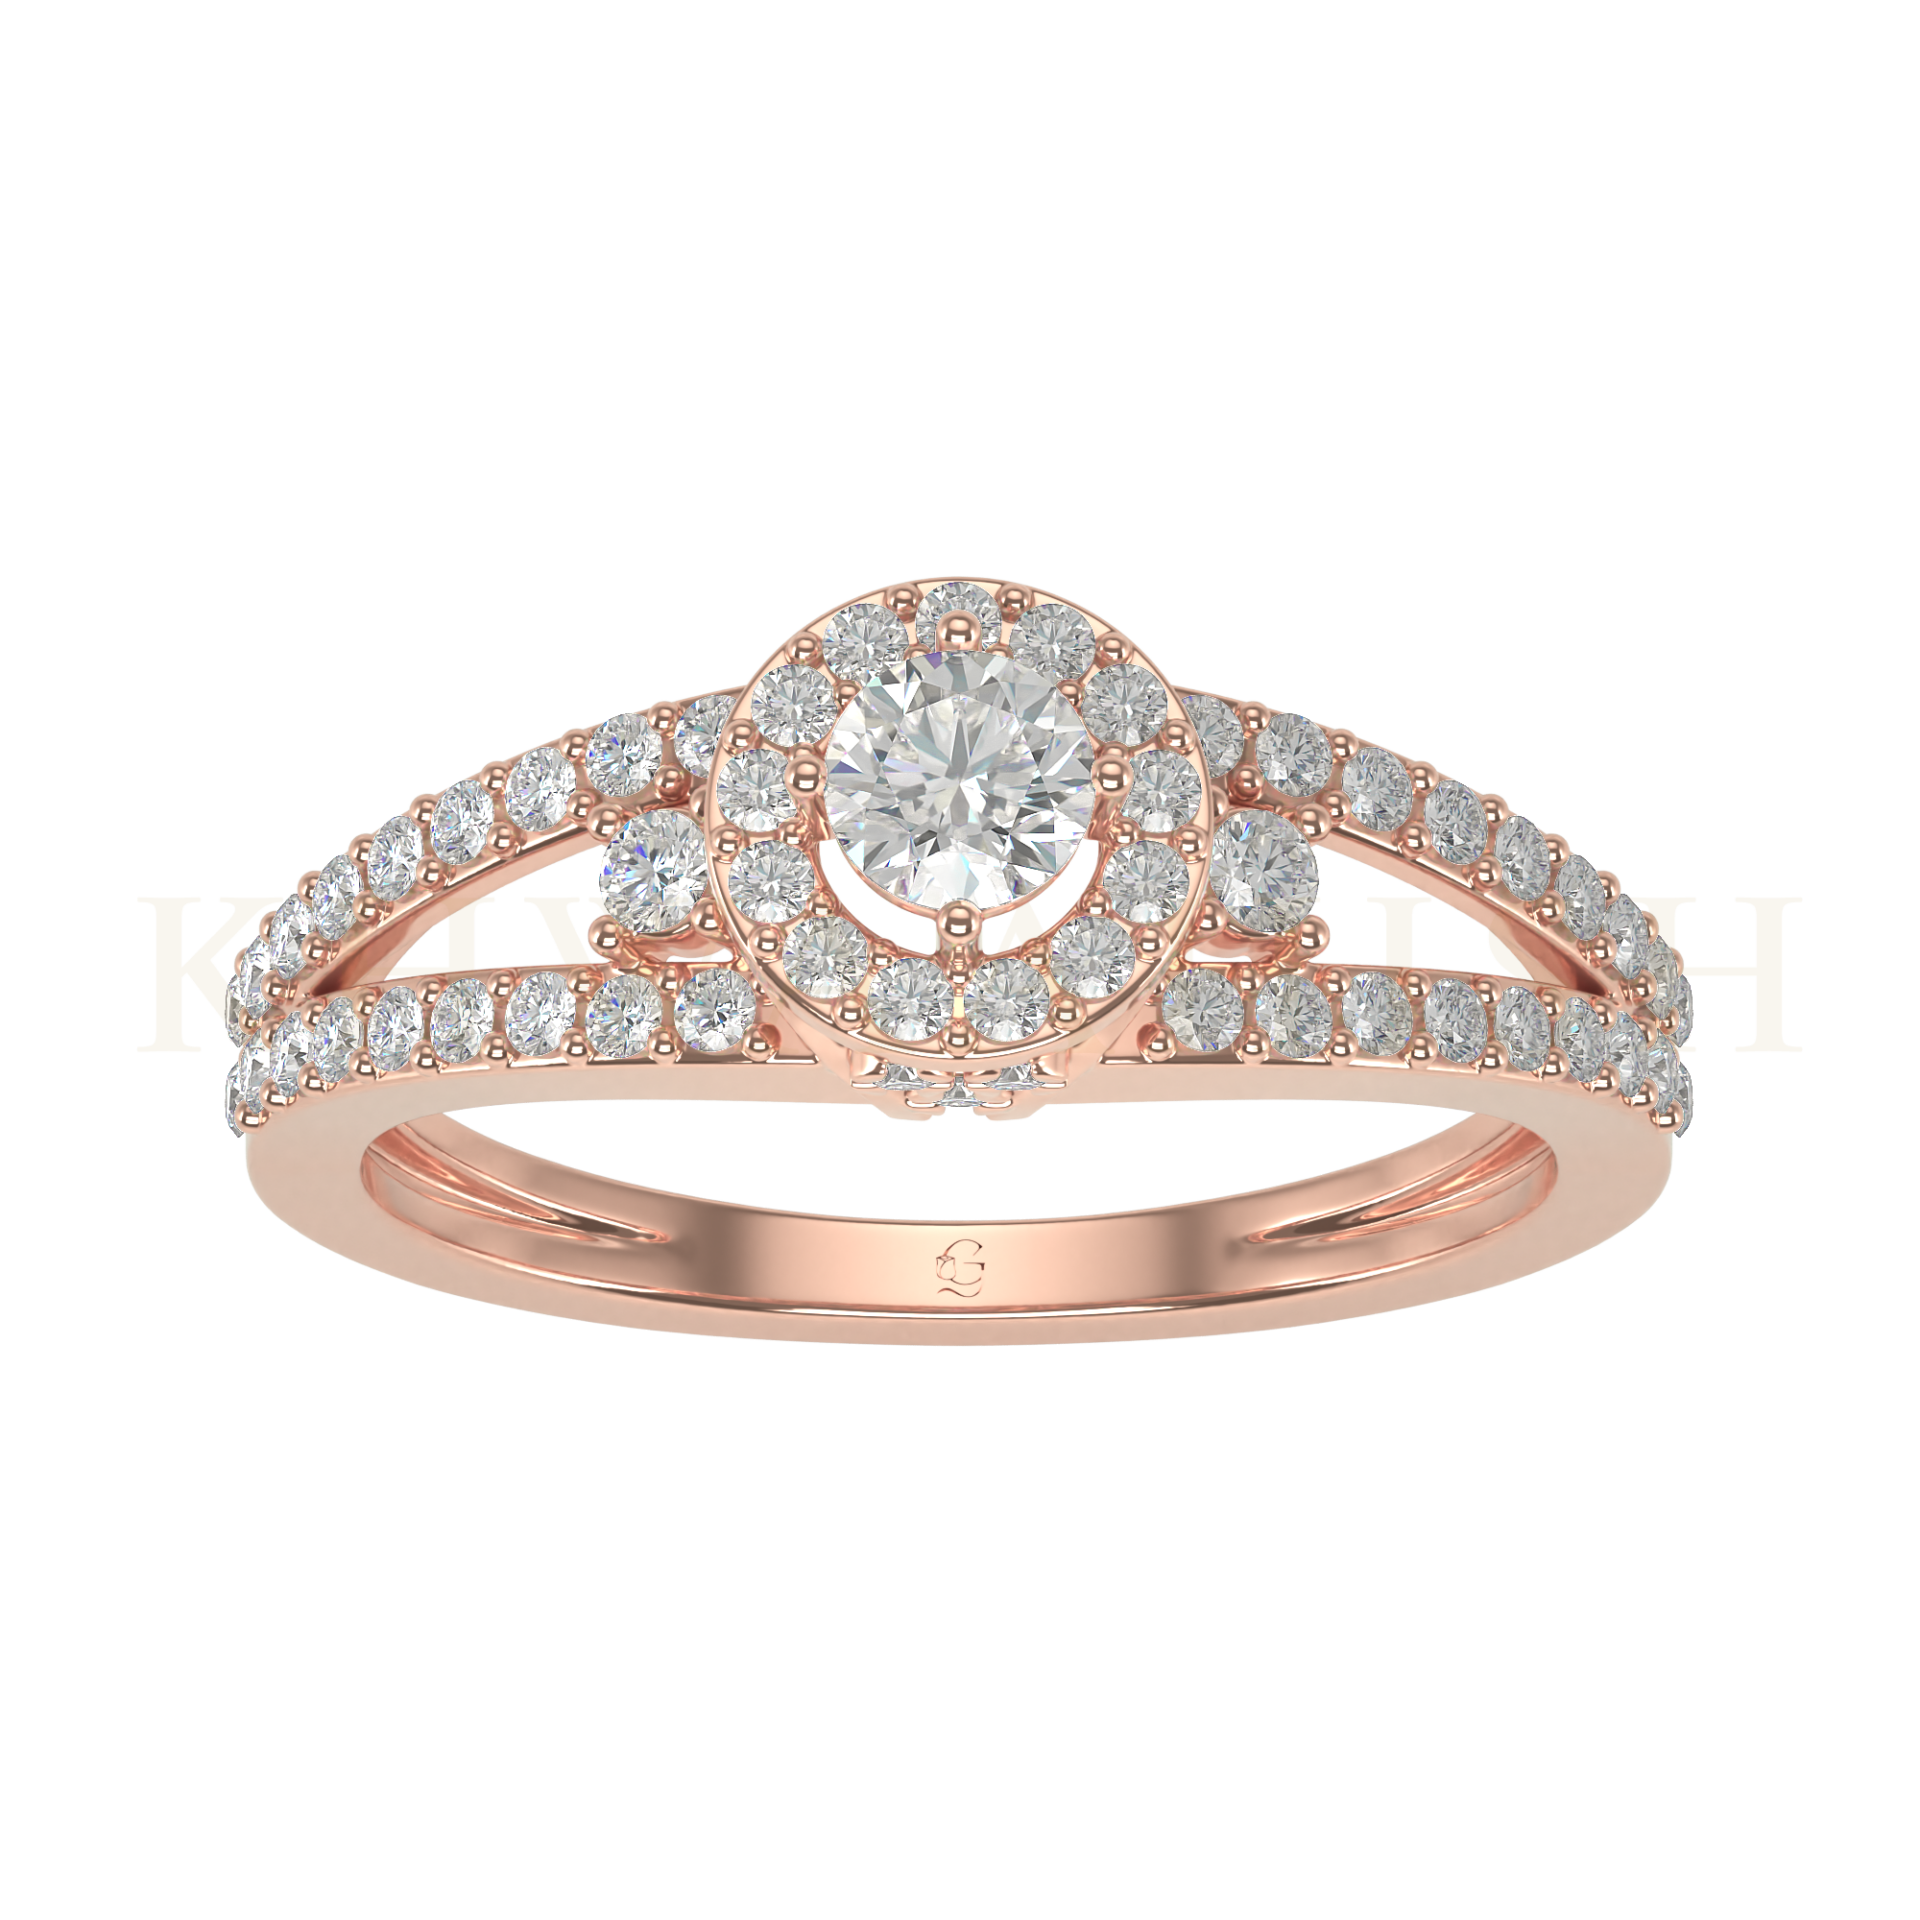 The Elevated Glory Solitaire Diamond Ring studded with 0.25ct solitaire diamond.